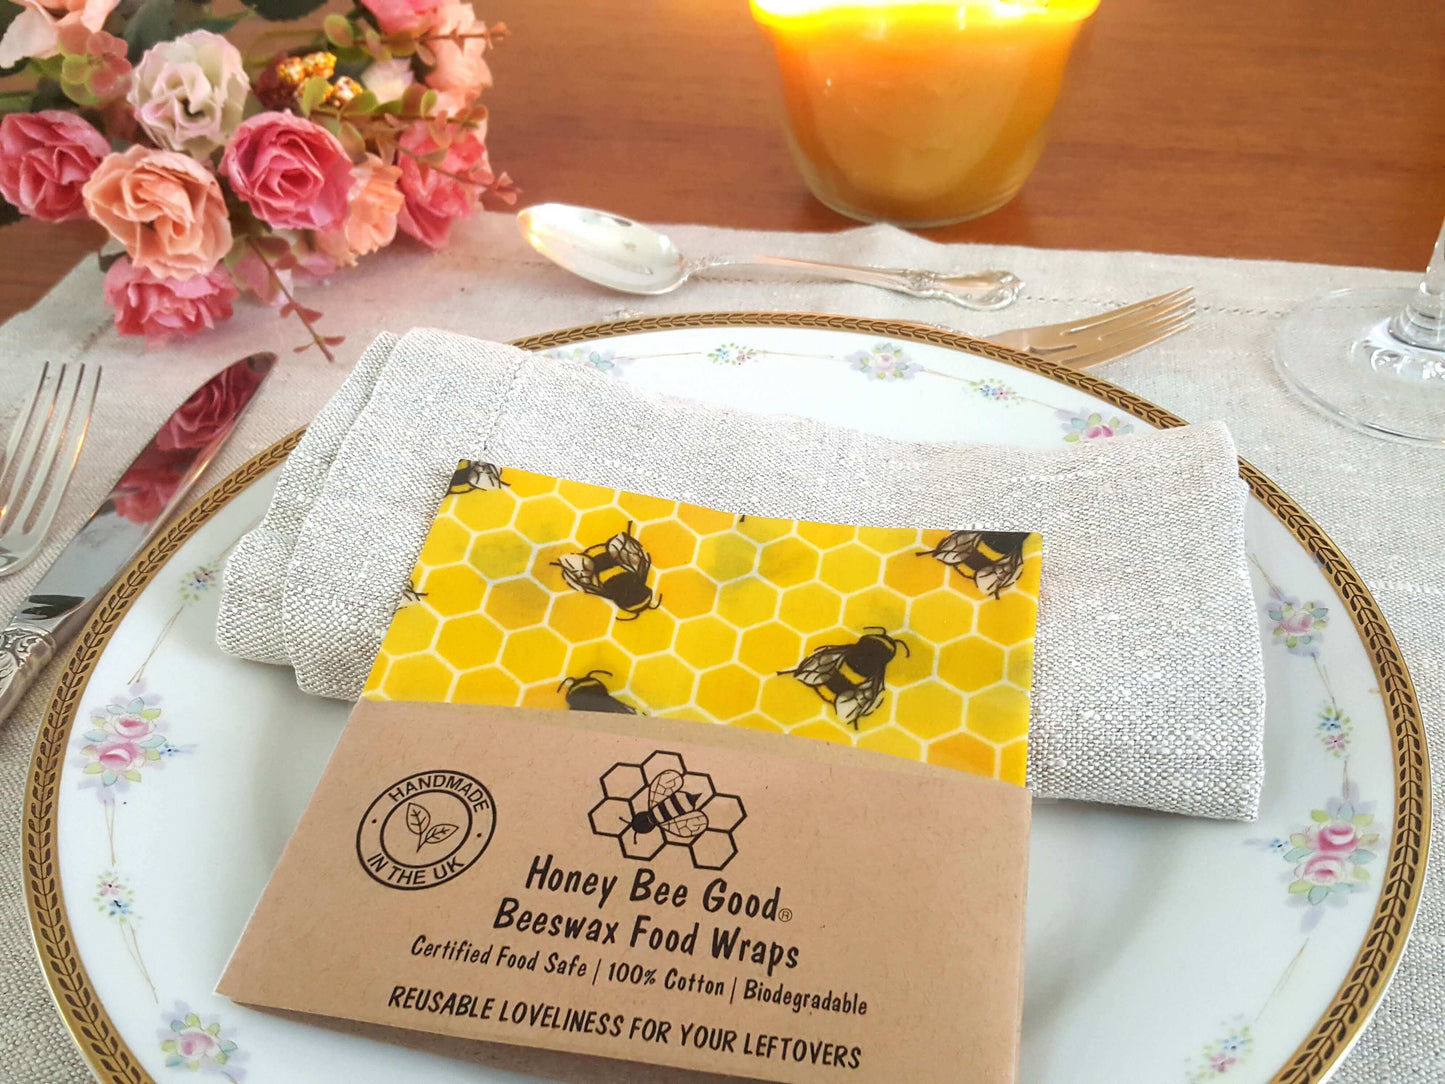 Reusable Beeswax Food Wraps 100% Hand Made in the UK by Honey Bee Good shown in Single Party Favour